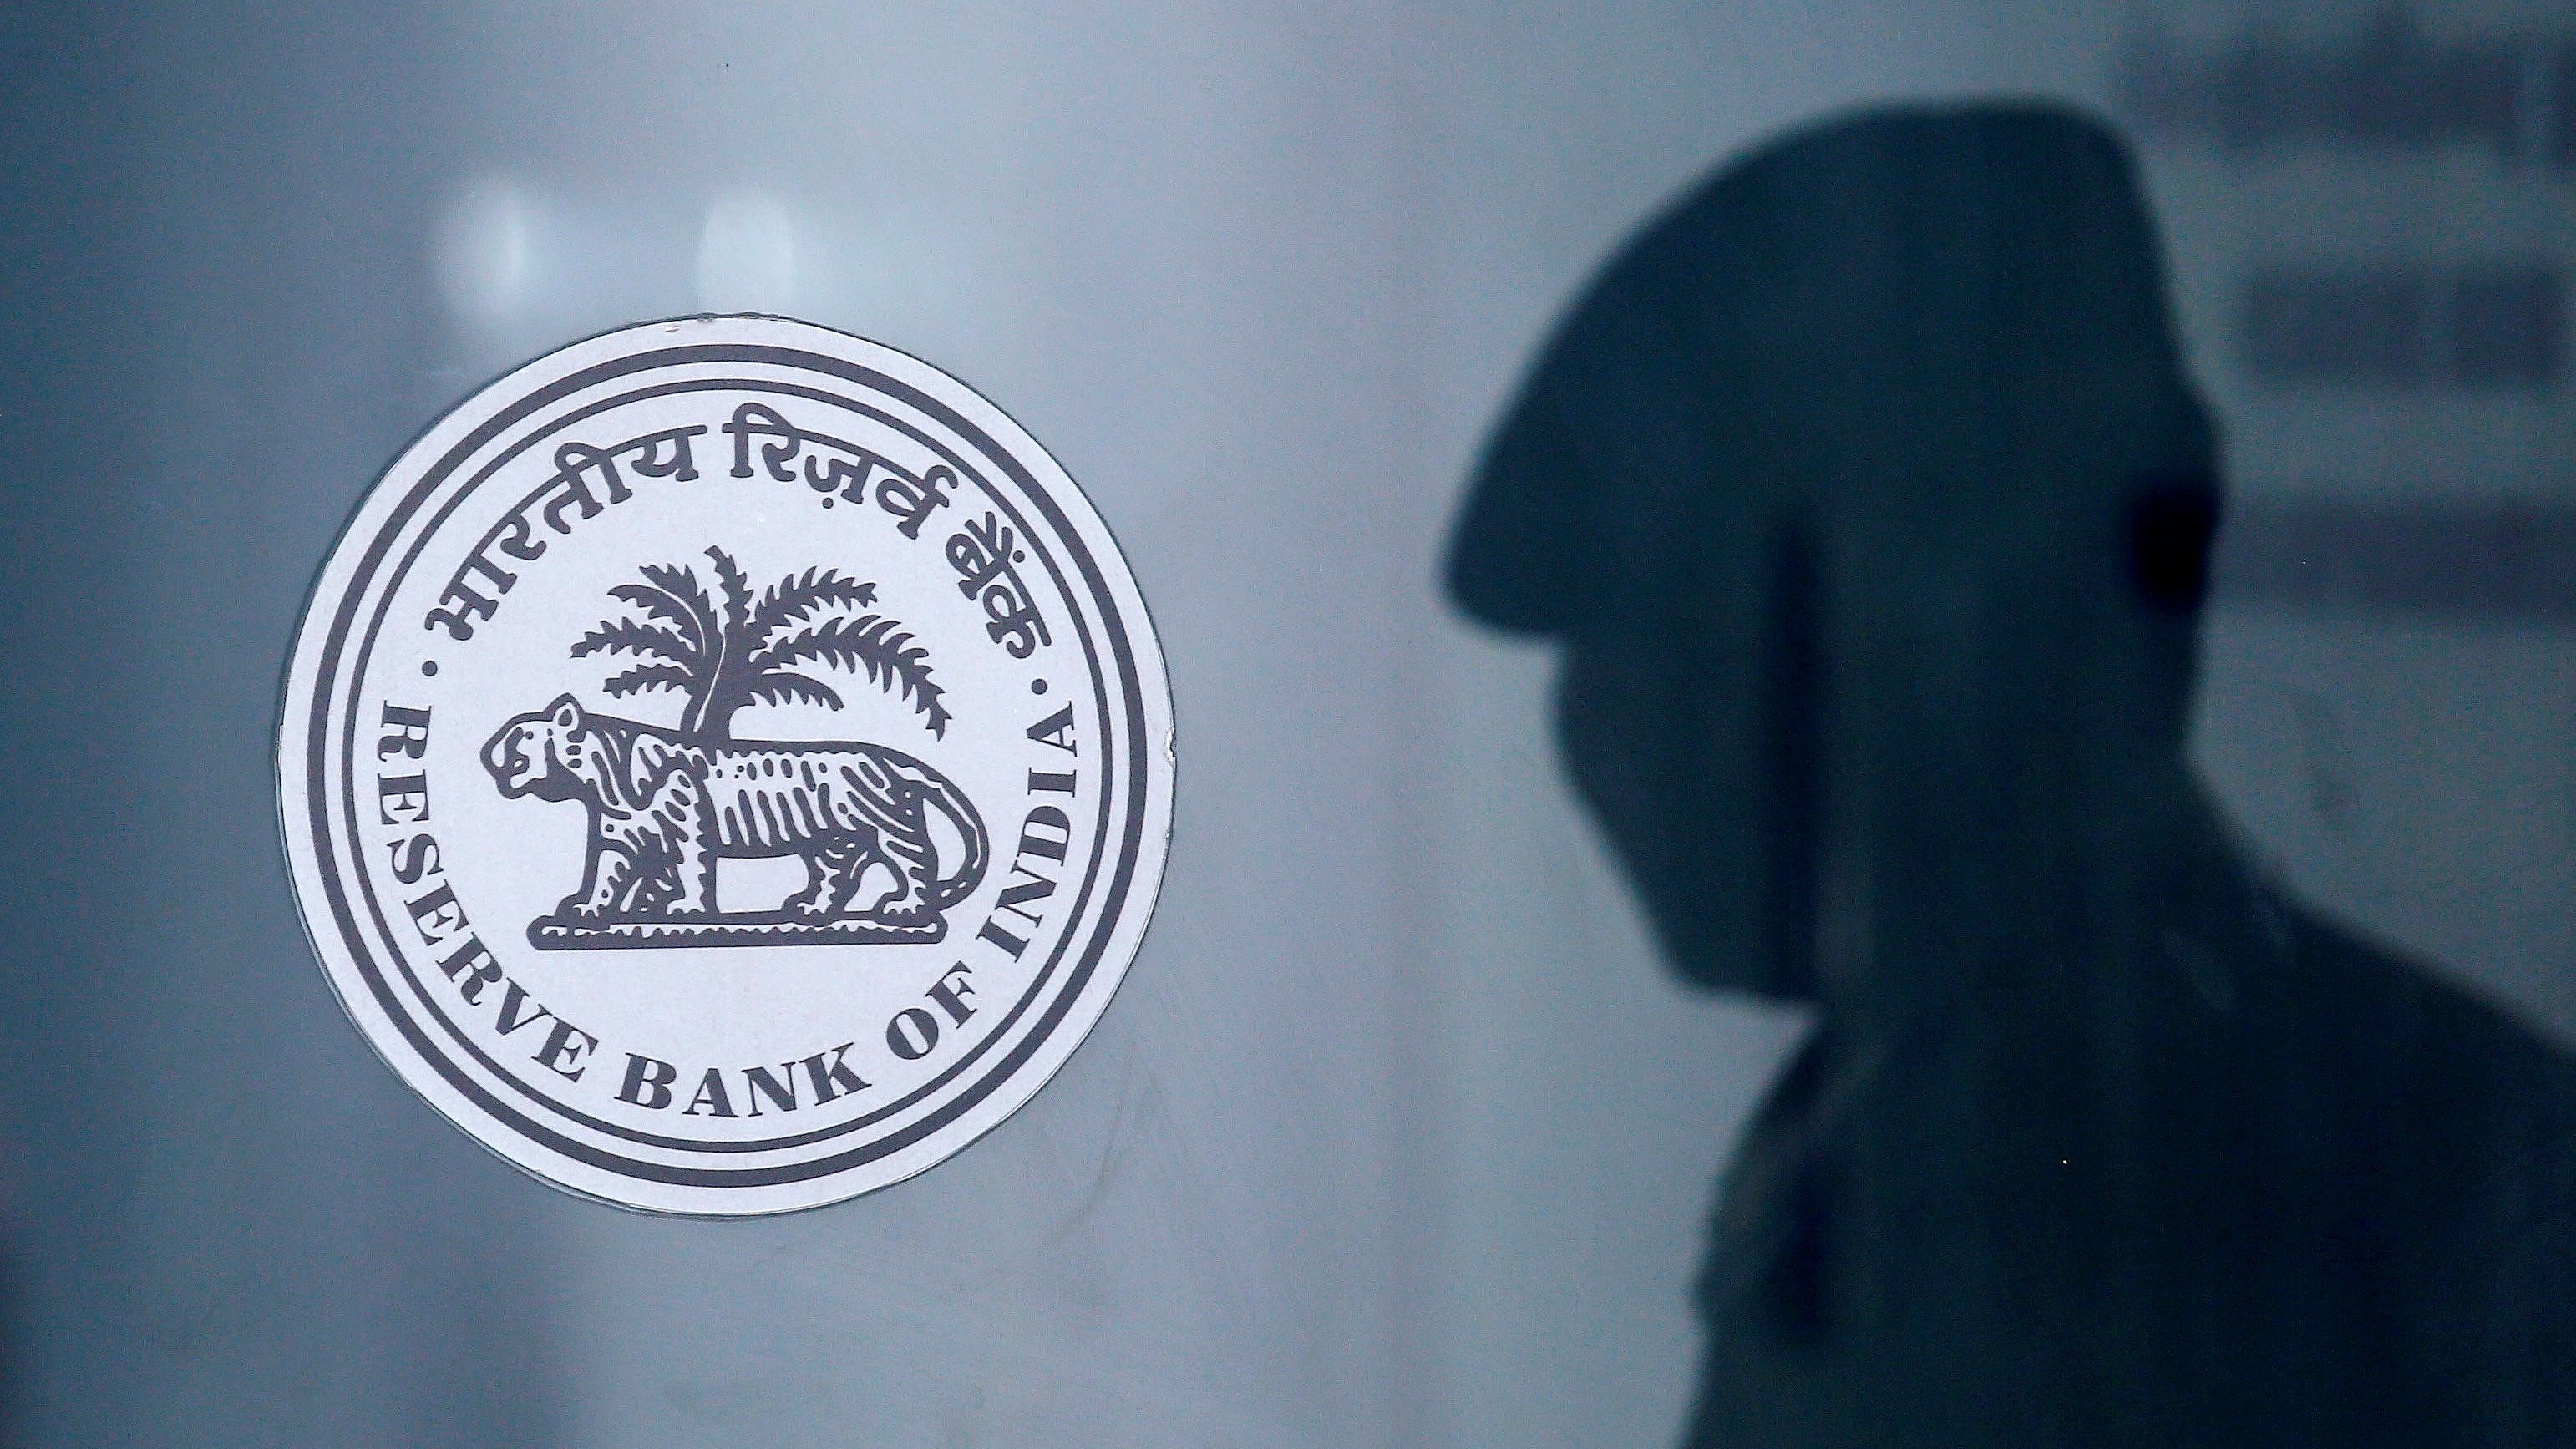 The RBI further said the applicants not found suitable under Guidelines for ‘on tap’ Licensing of Small Finance Banks are: VSoft Technologies Private Limited and Calicut City Service Co-operative Bank Limited. Credit: Reuters File Photo